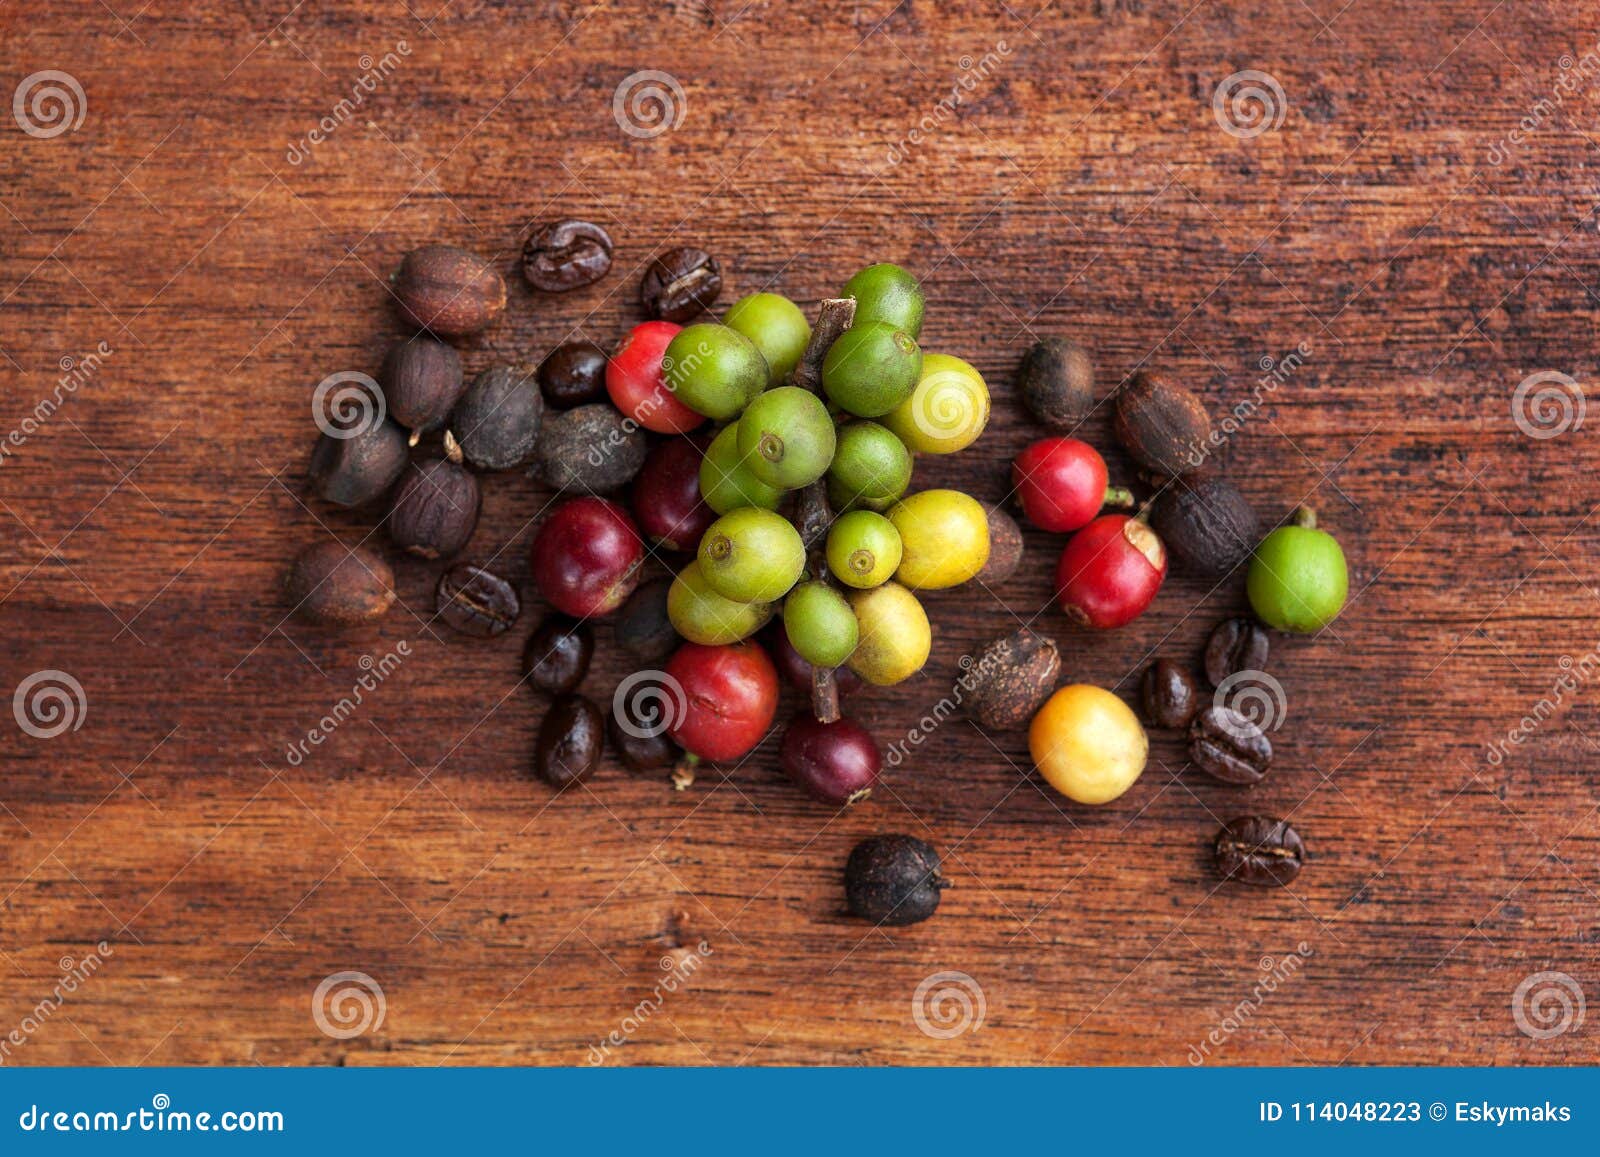 coffea fruit and coffee beans.